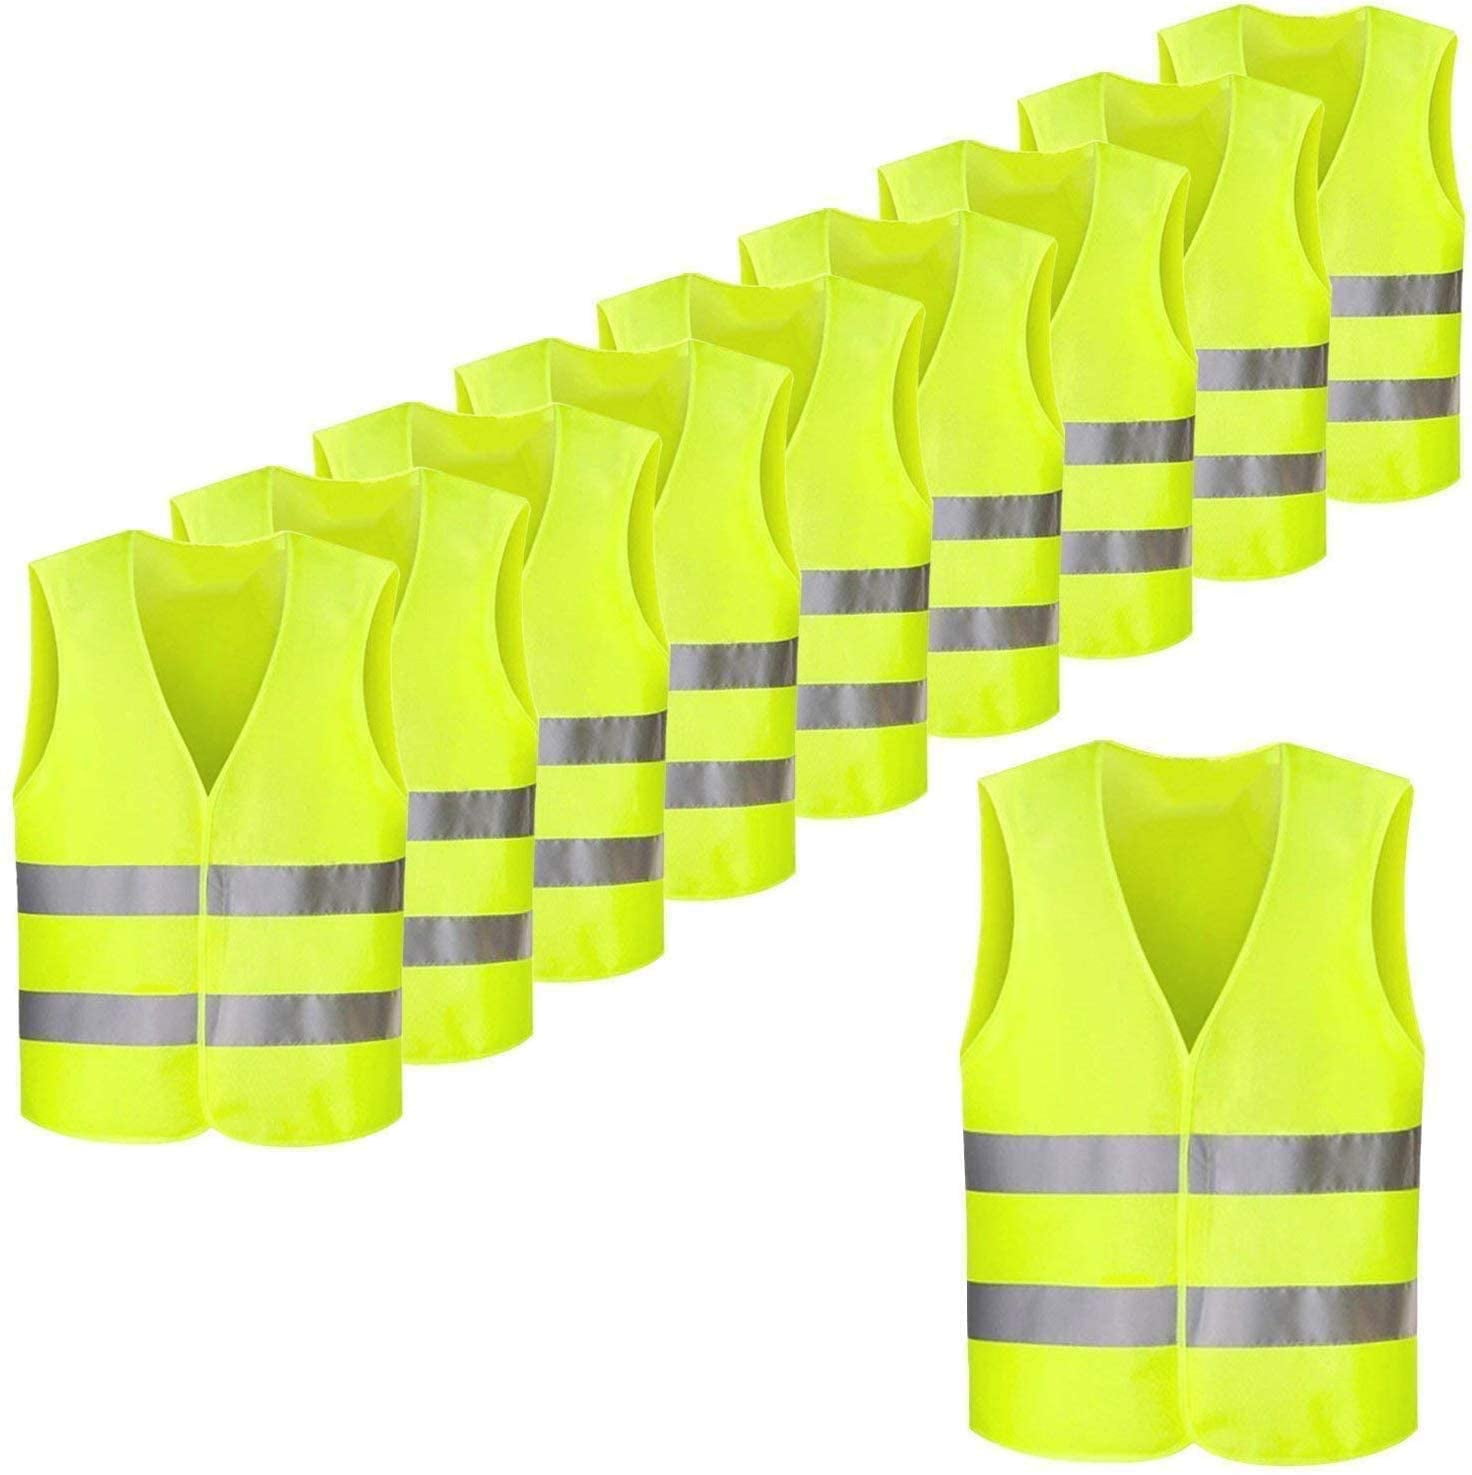 2x Patches data-mtsrclang=en-US href=# onclick=return false; 							show original title te Security m 2x Patches Details about   NEW 1213 Yellow Reflective Dog Driving Safety Vest Security M 